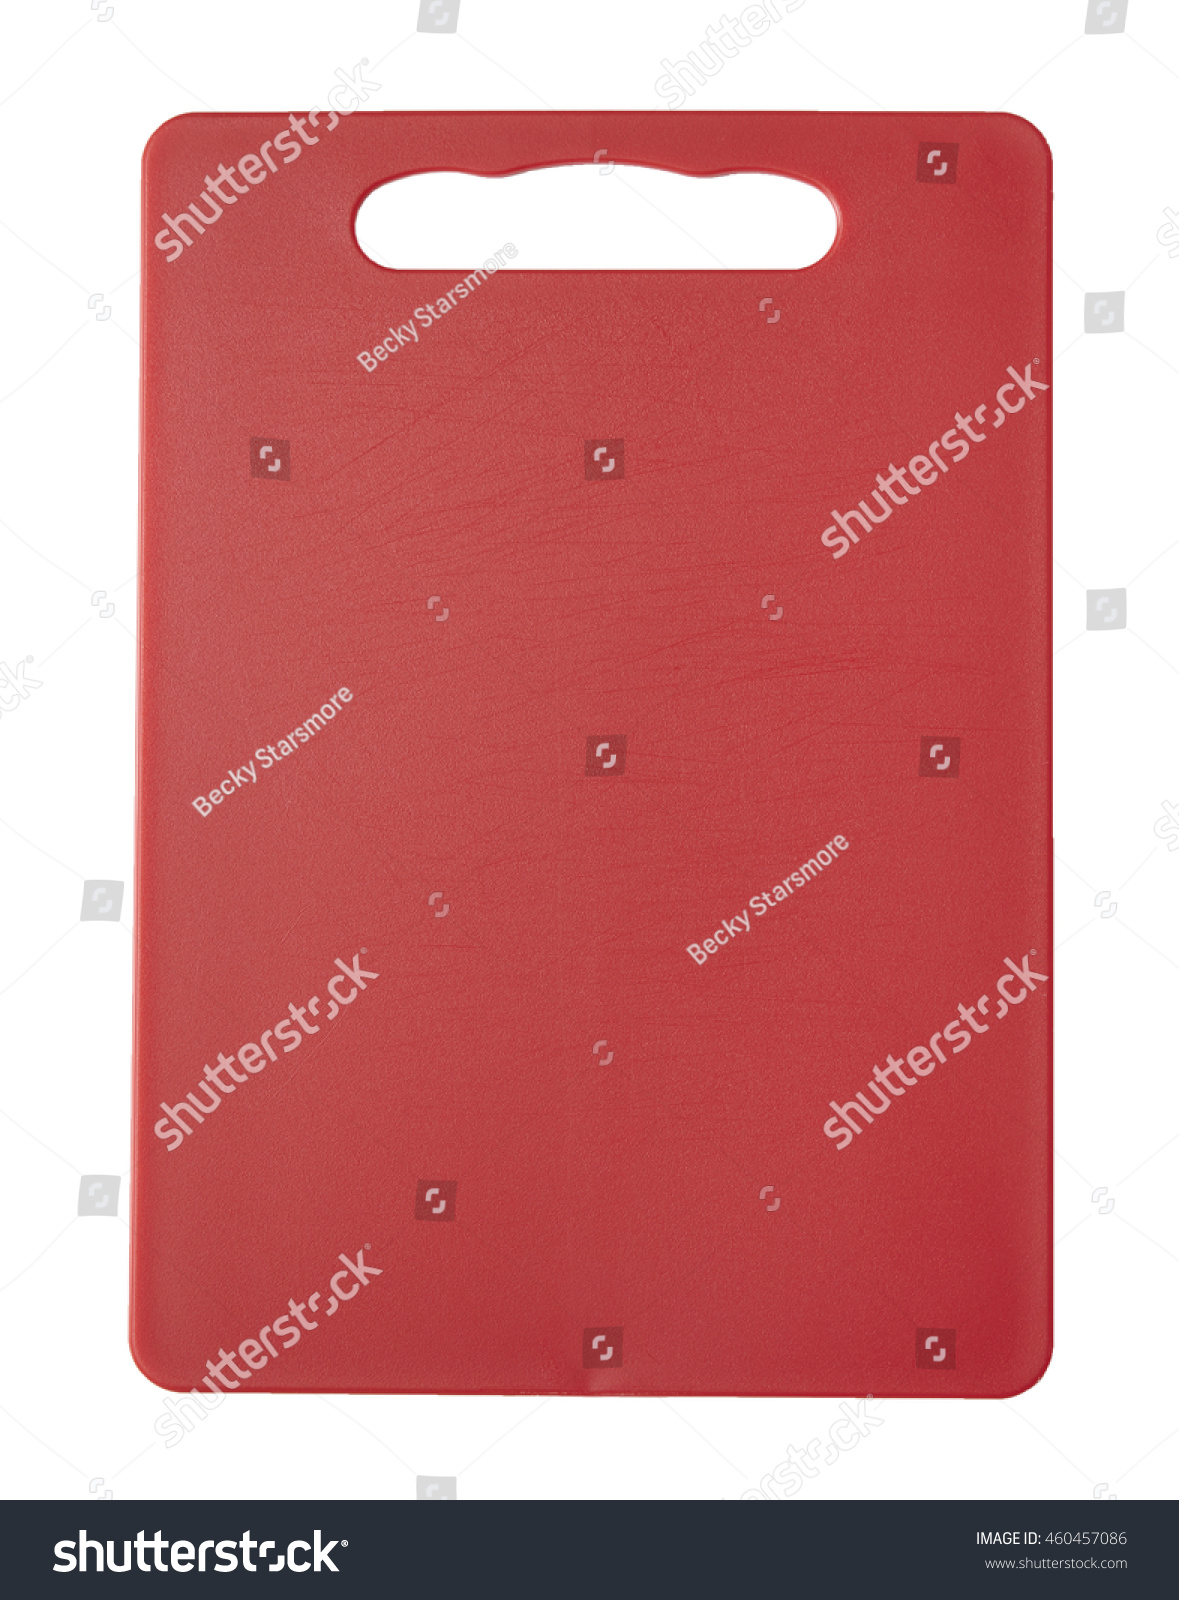 red plastic chopping board